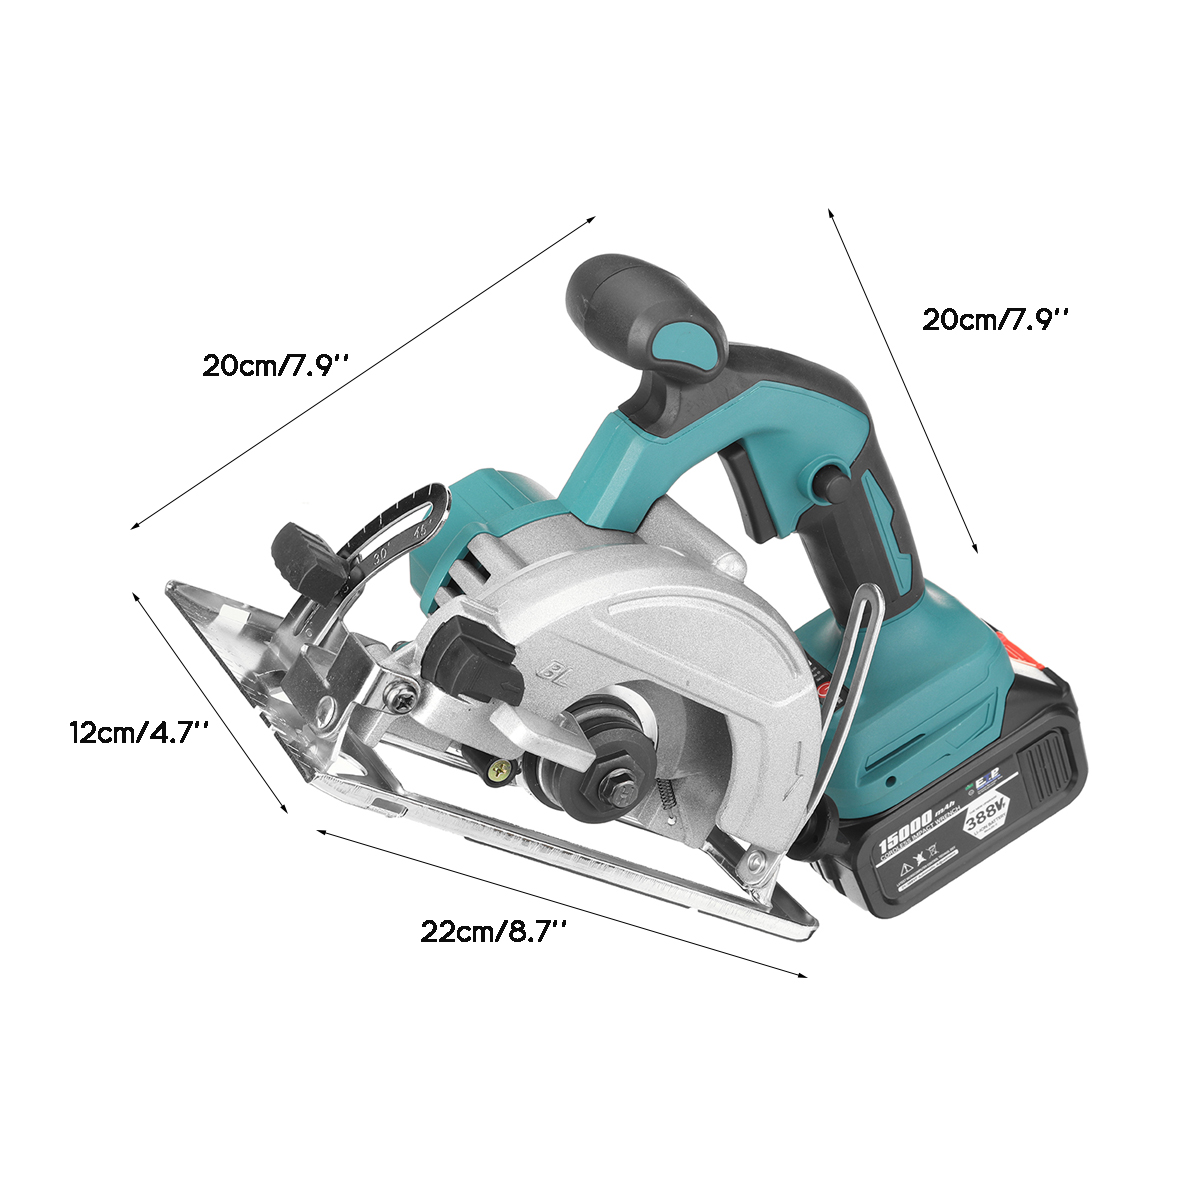 388VF-Electric-Circular-Saw-Woodworking-Wood-Wood-Cutter-W-None12-Battery-For-Makita-1859077-5